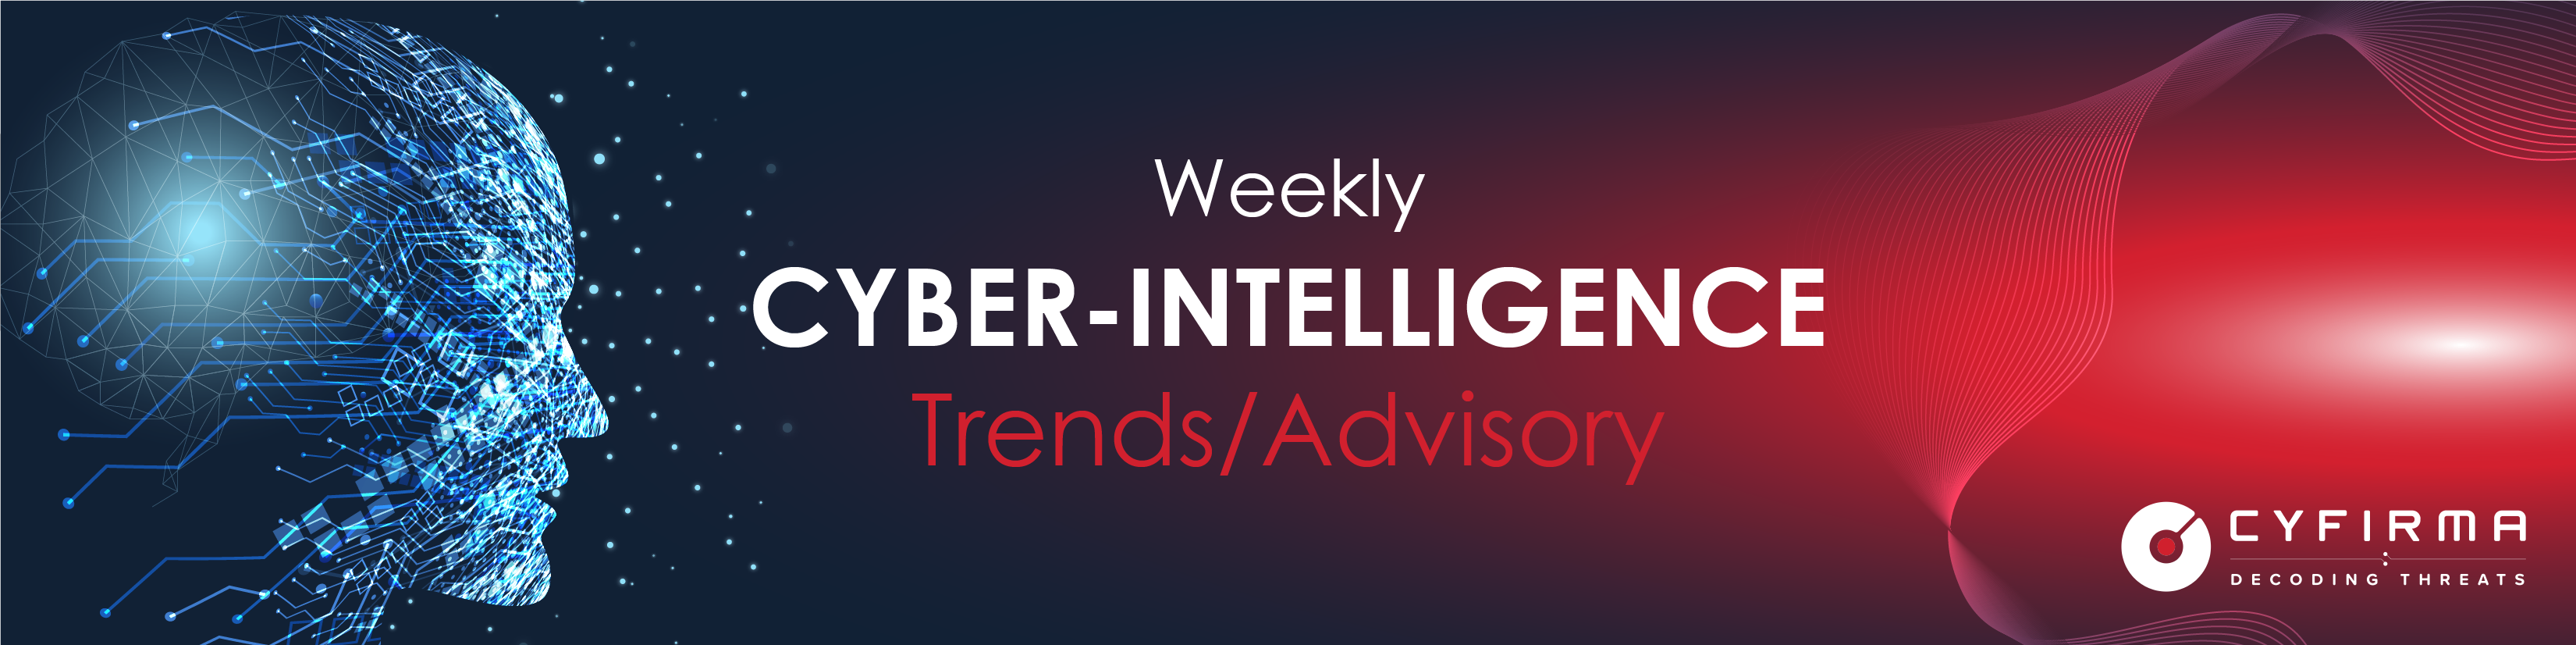 Weekly Intelligence Trends and Advisory | Threat Actor in Focus | Rise in Malware, Ransomware, Phishing | Vulnerability and Exploits – 14 Nov 2021